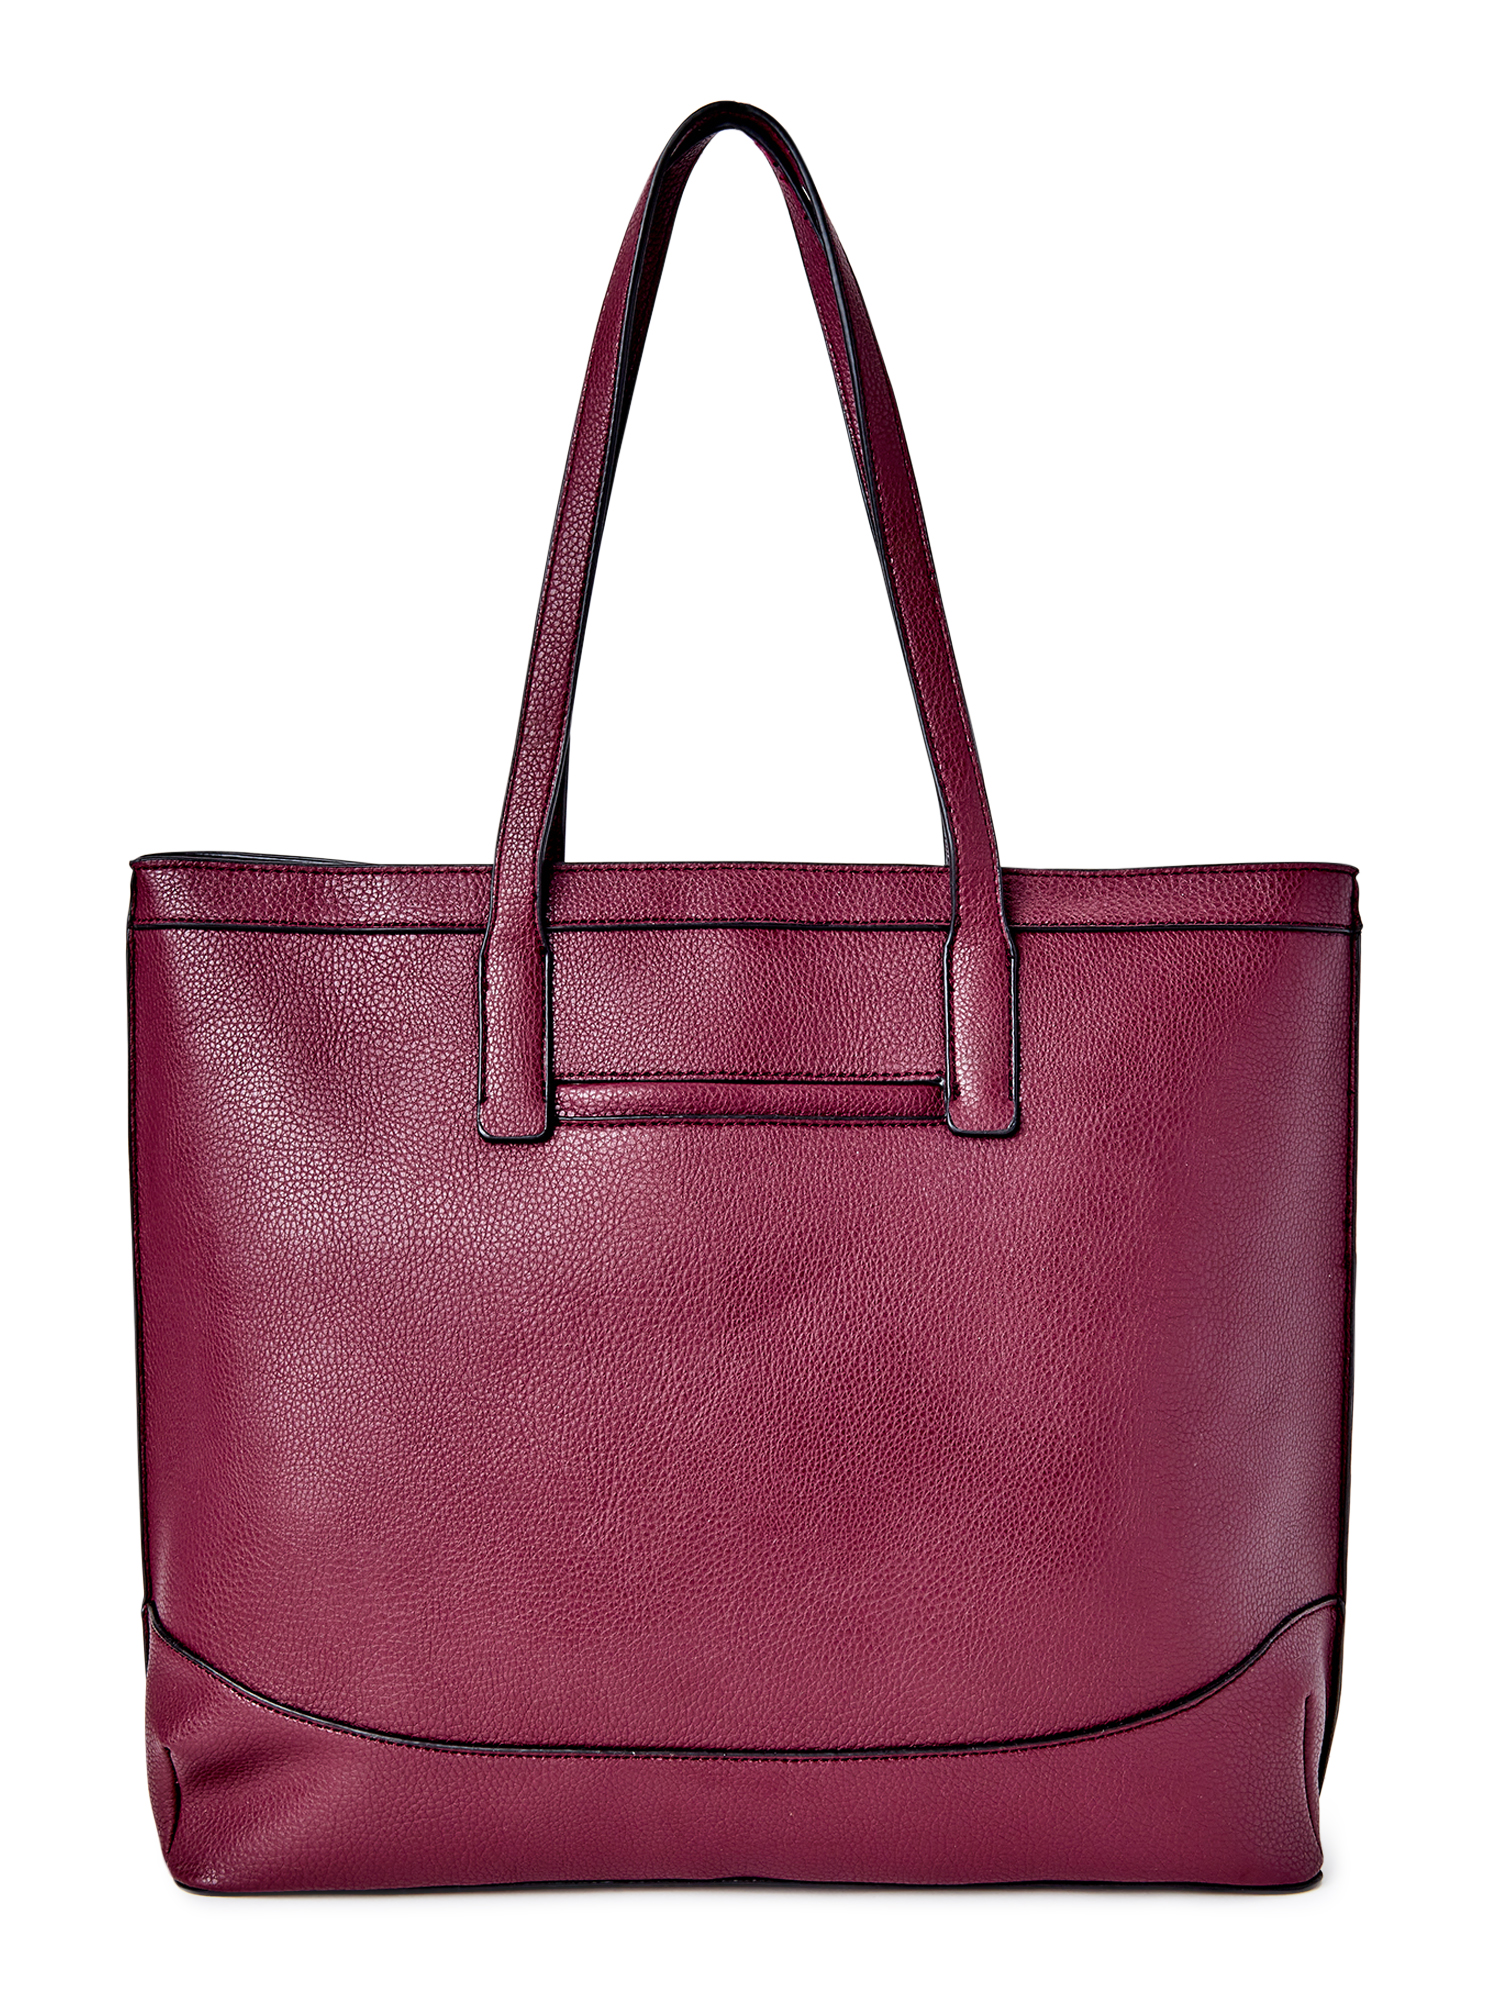 C. Wonder Women's Emma Faux Suede Studded Tote Bag Wine - image 3 of 5